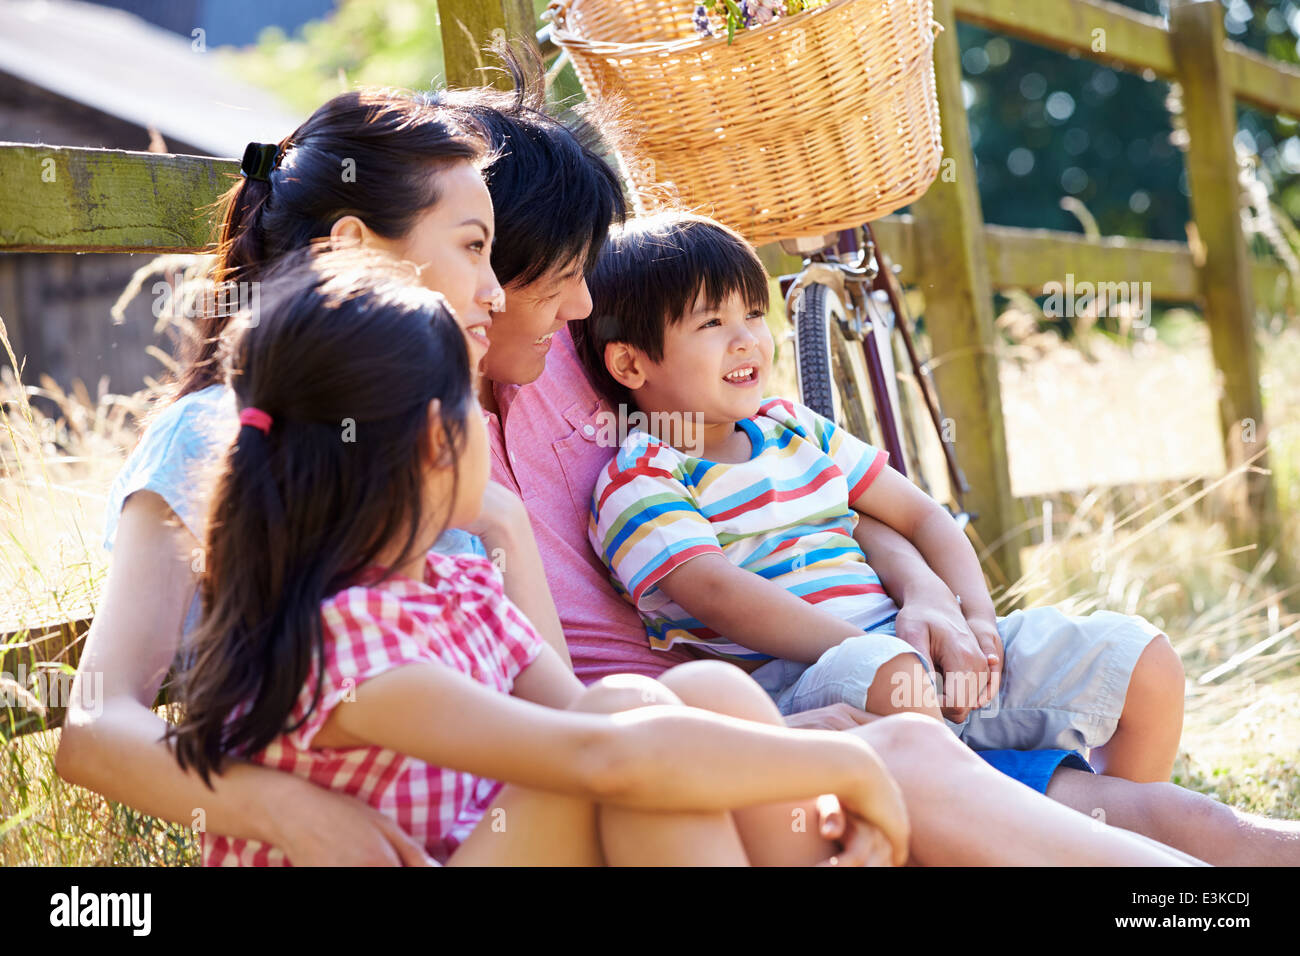 Asian Family Resting By Fence With Old Fashioned Cycle Stock Photo